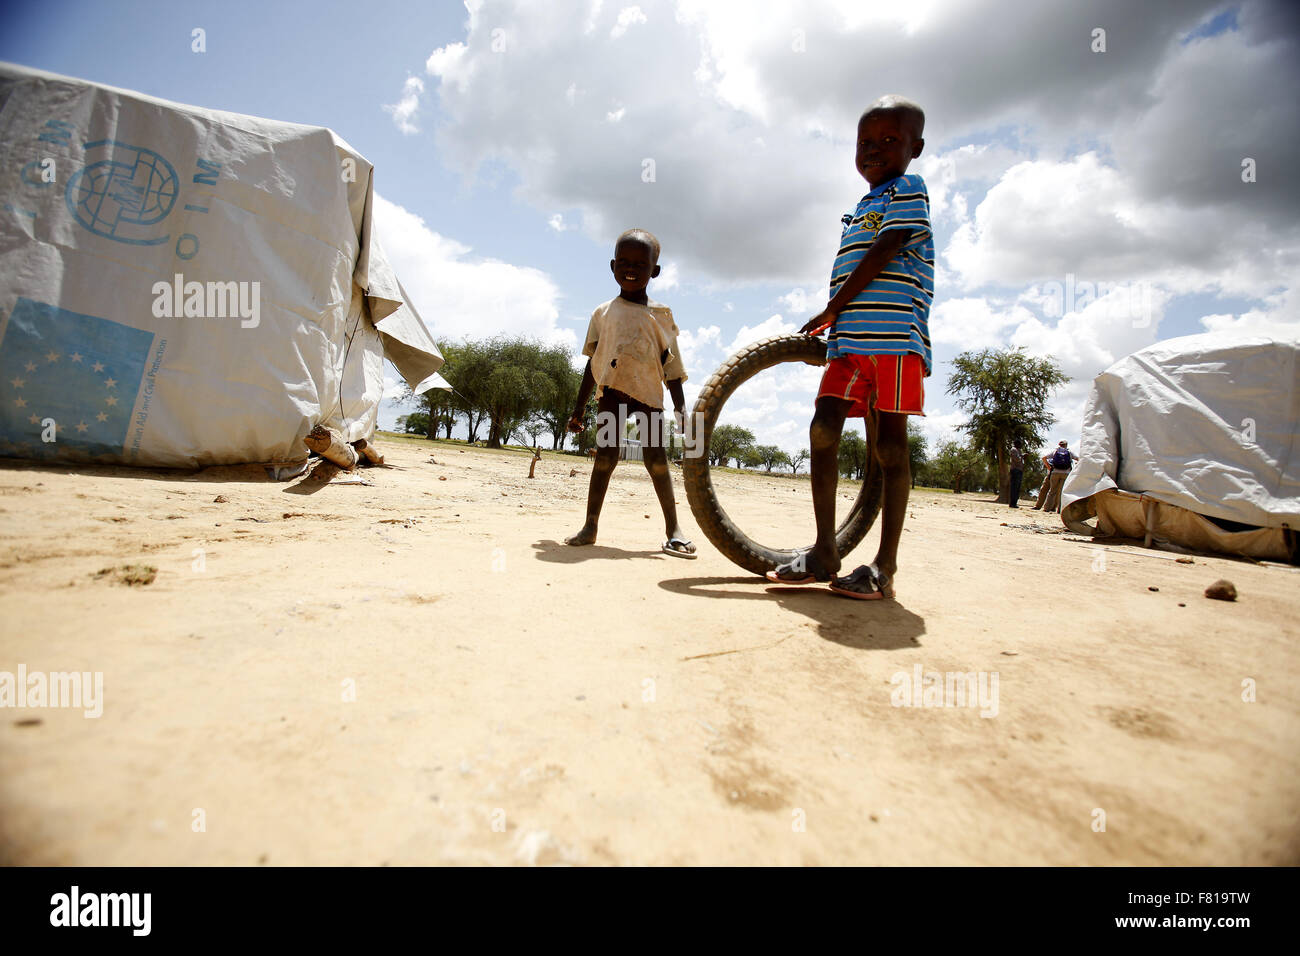 Kids play in an Internally Displaced Persons camp in Turalei, Warrap State of South Sudan Sept 19, 2015. World Vision has been been working in this hard to reach region since 1989 providing humanitarian relief and development assistance. 16th Sep, 2015. Photo Andre Forget © ©/ZUMA Wire/Alamy Live News Stock Photo